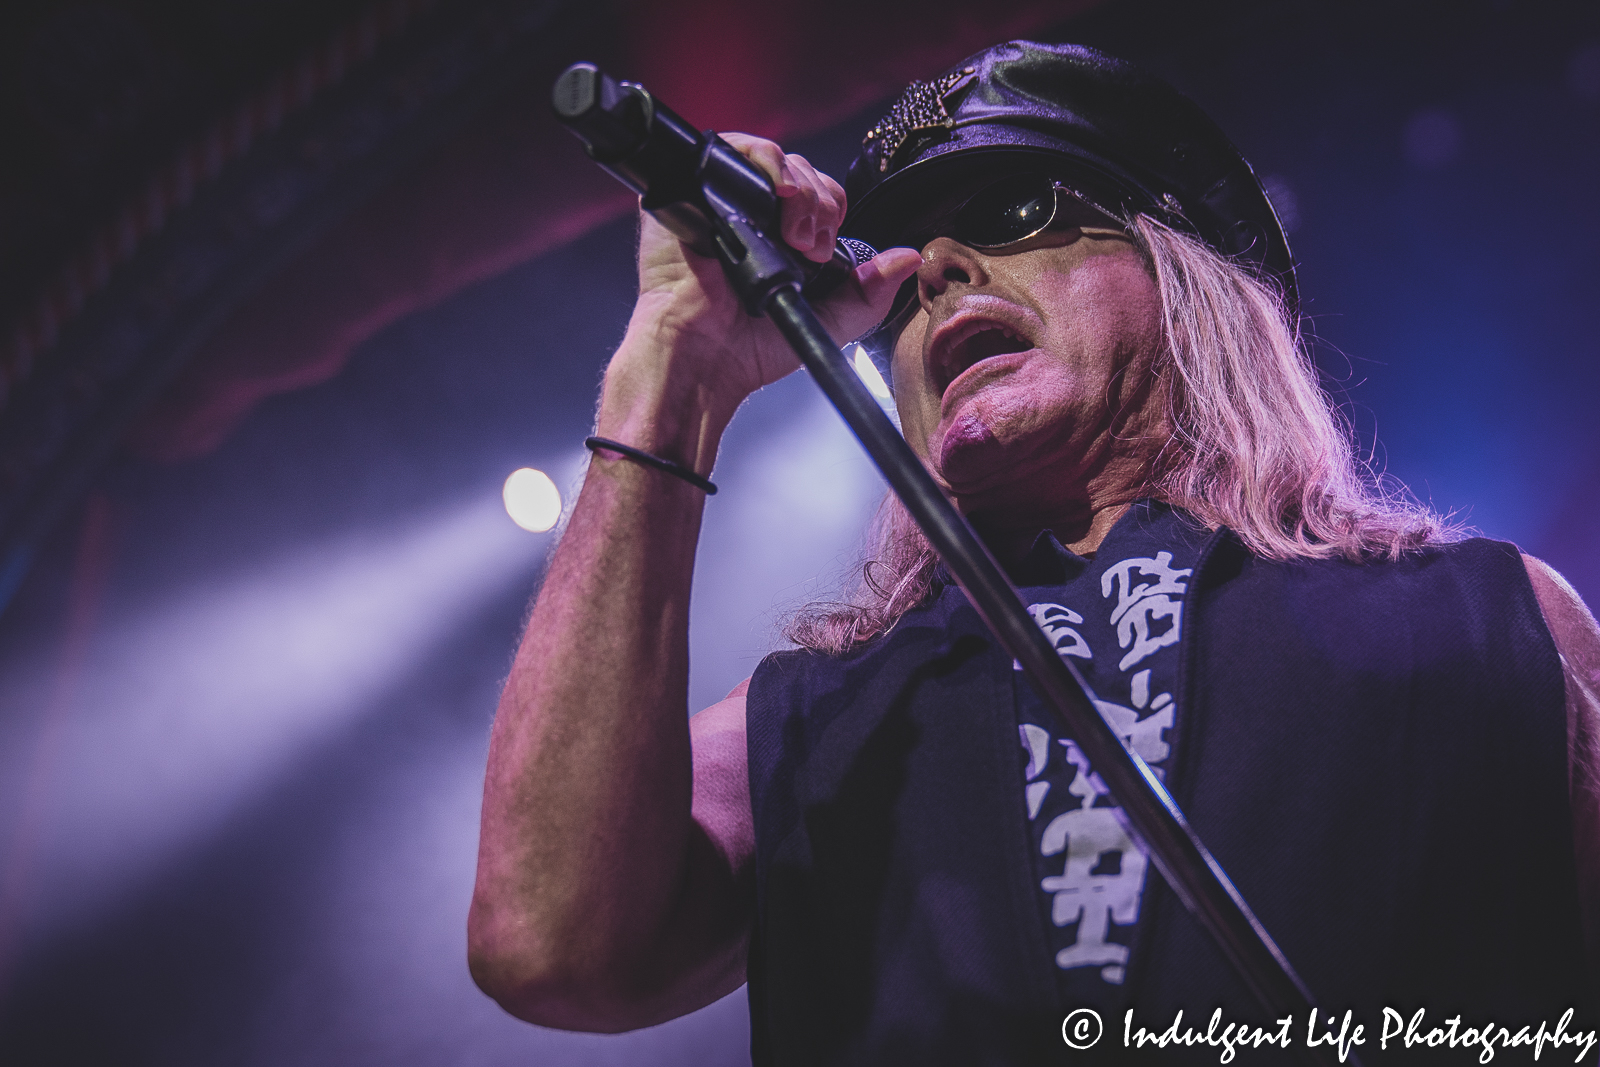 Frontman Robin Zander of Cheap Trick opening the show at Uptown Theater in Kansas City, MO with "Dream Police" on September 13, 2022.